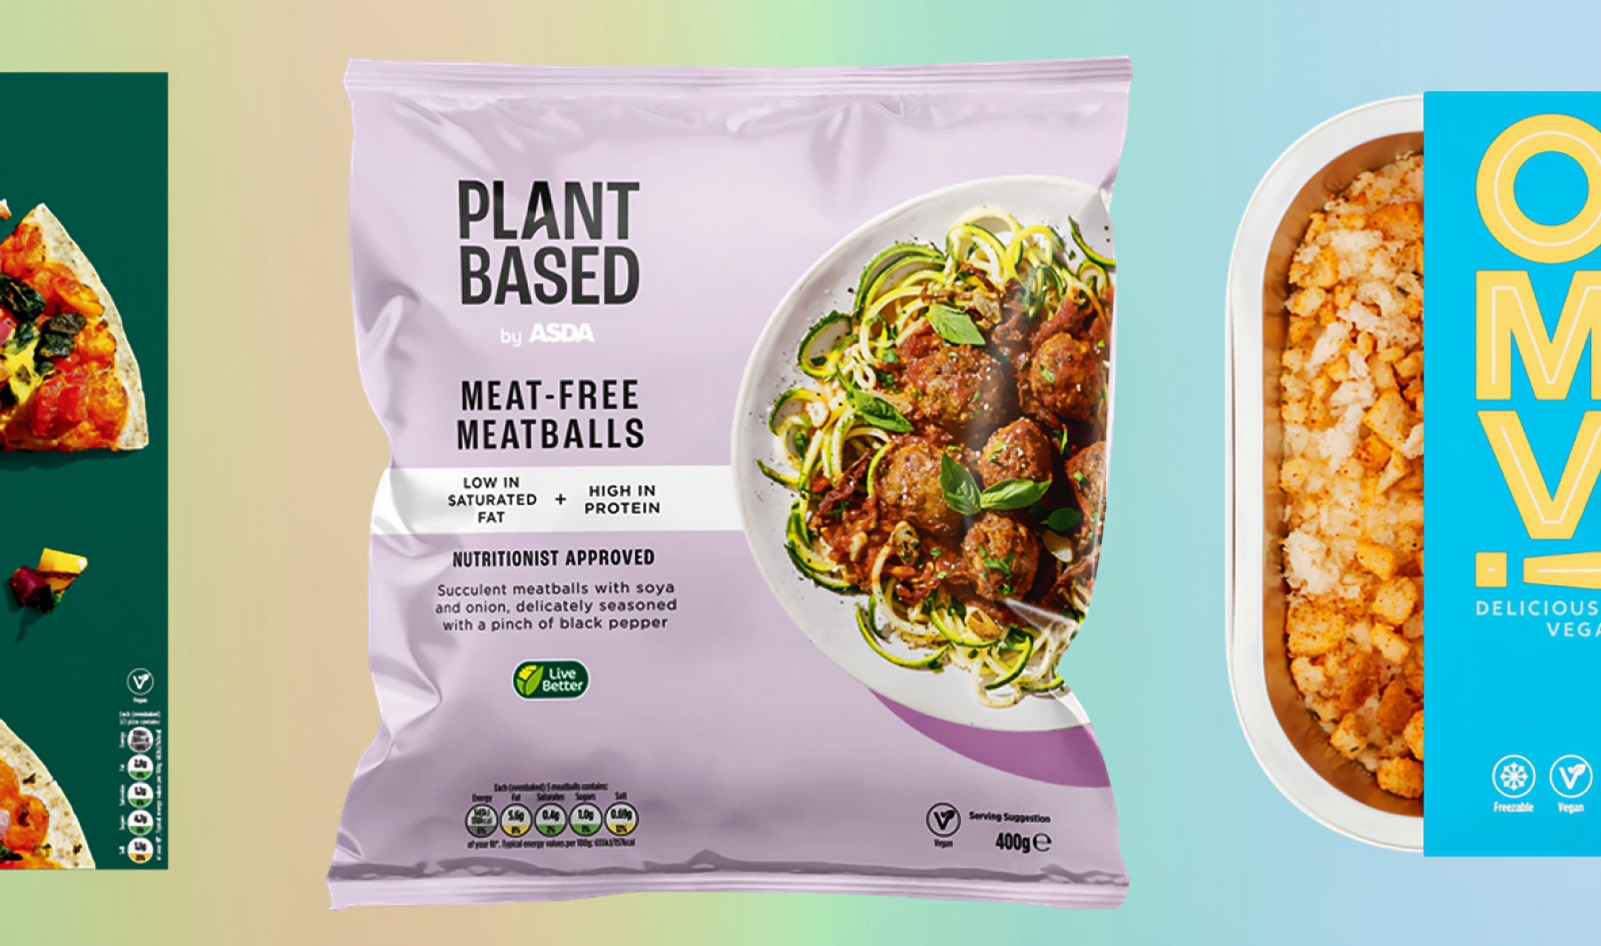 Over 100 New Vegan Products Are Coming to 3 Major Supermarkets This Month